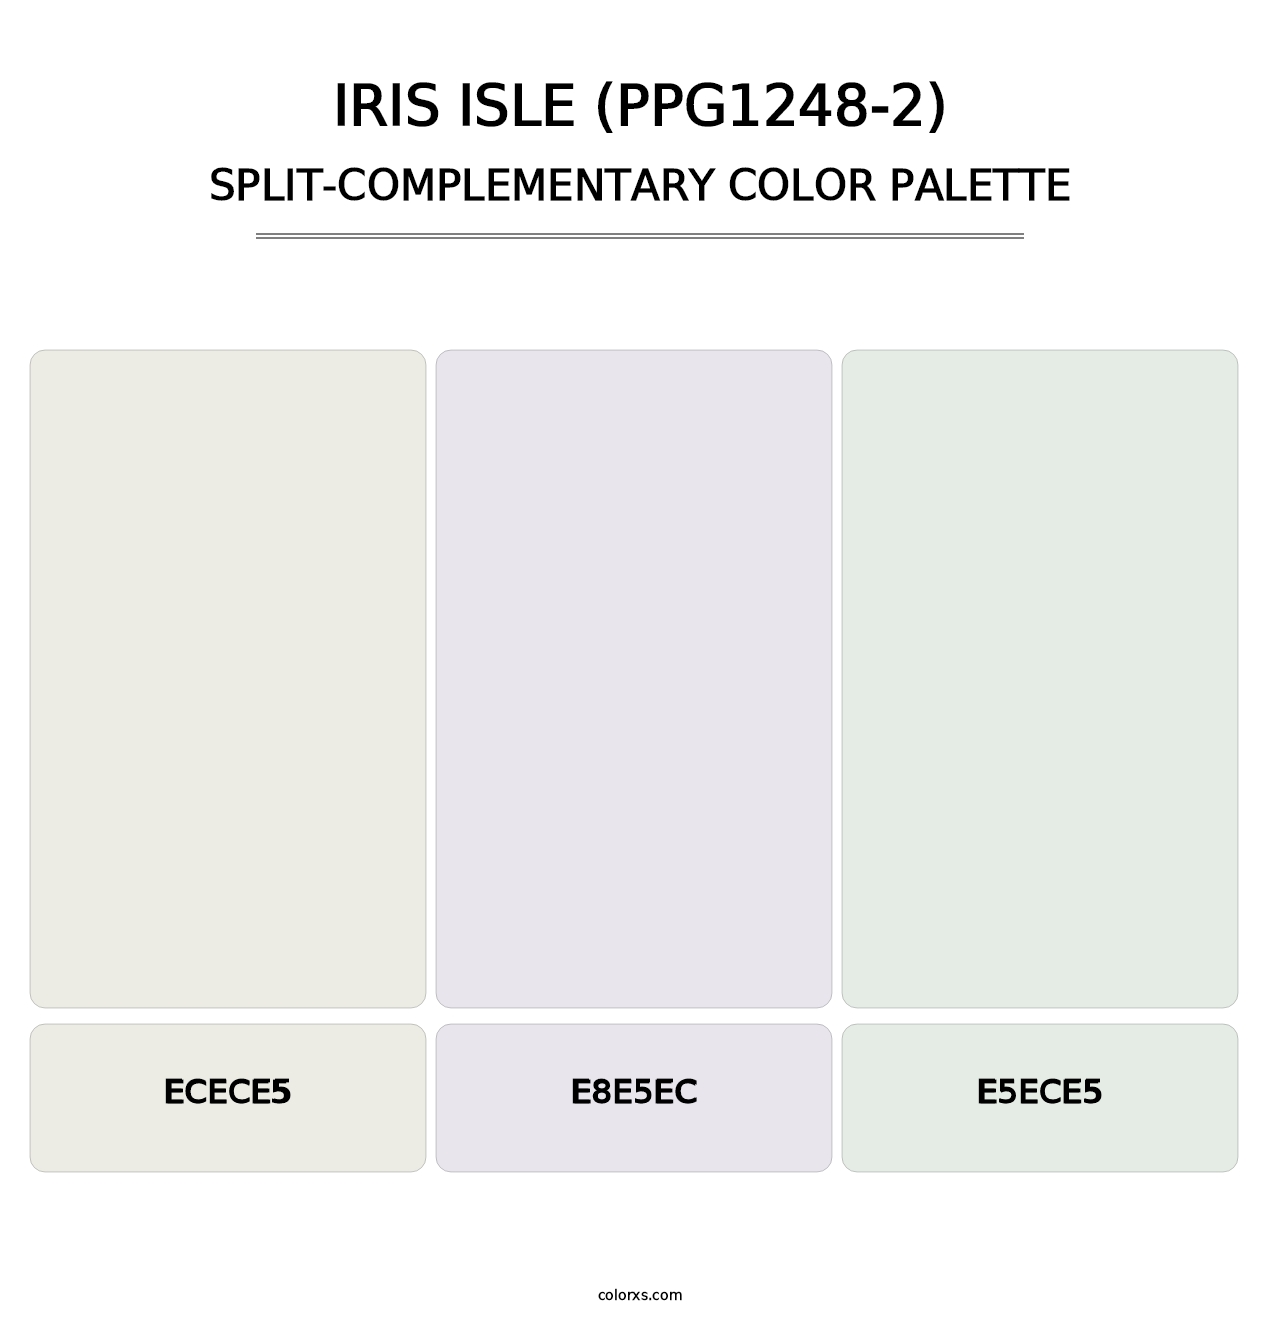 Iris Isle (PPG1248-2) - Split-Complementary Color Palette